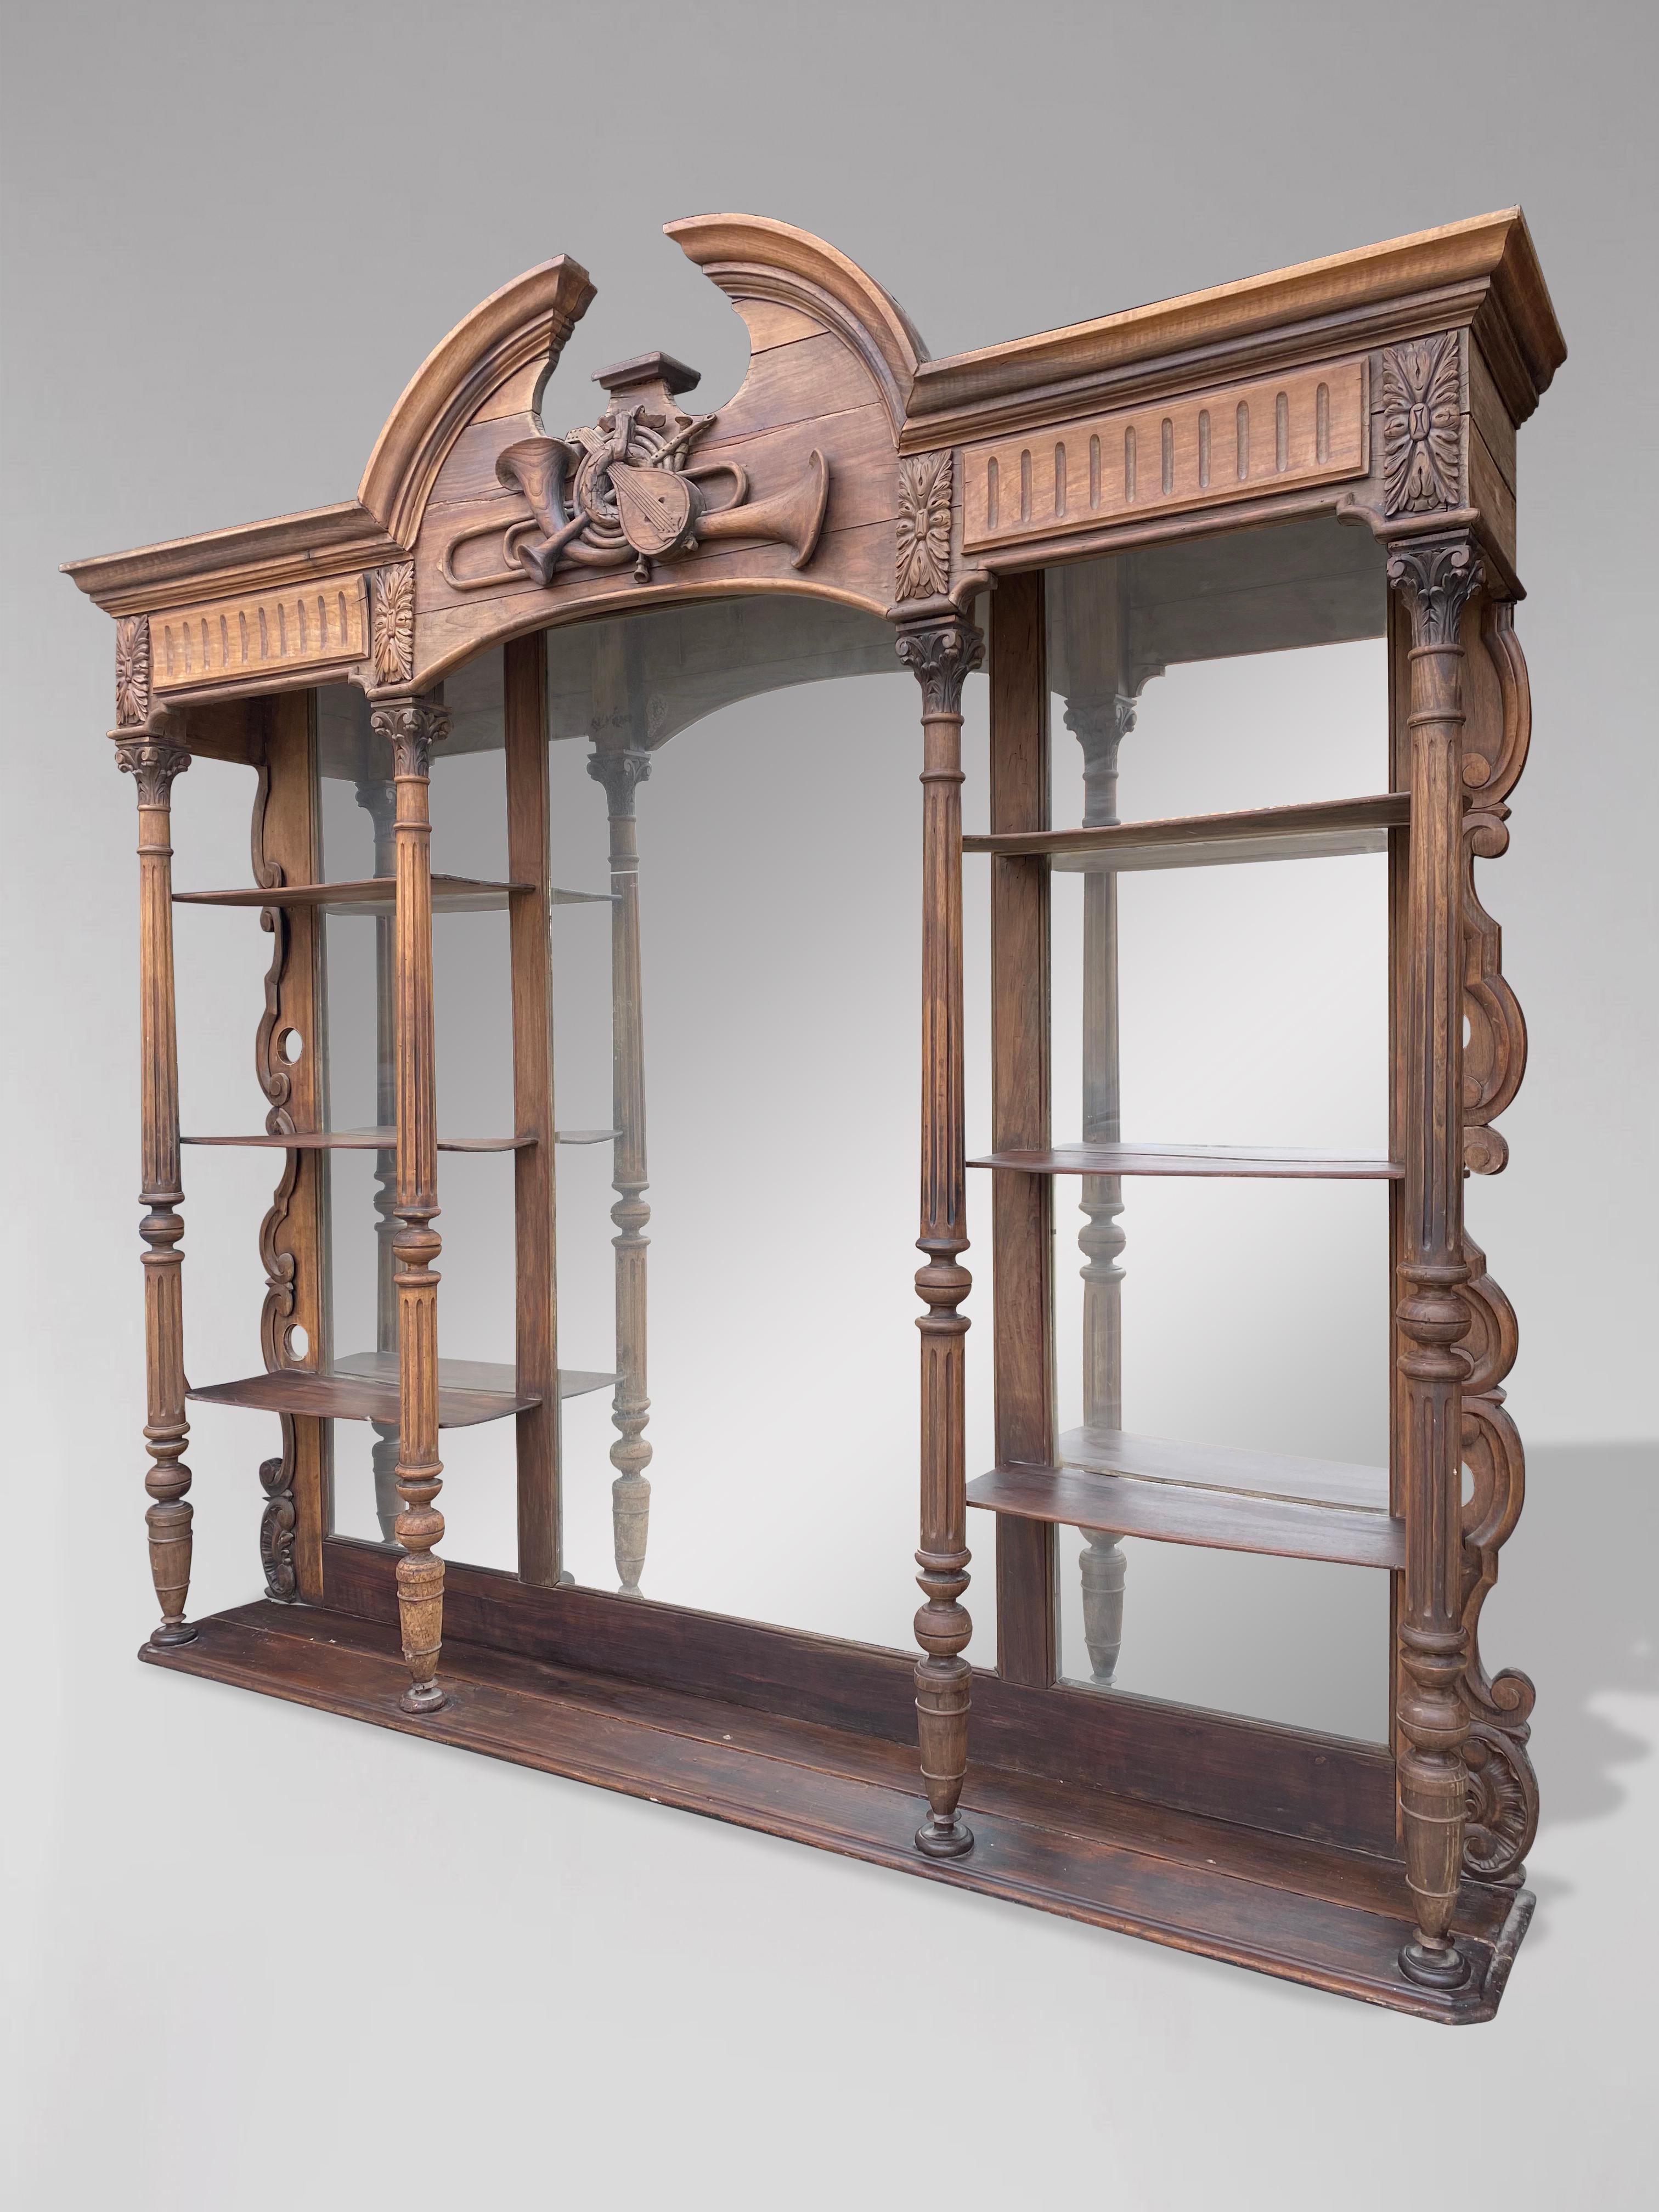 19th Century Large French Walnut Back Bar Etagère In Good Condition For Sale In Petworth,West Sussex, GB